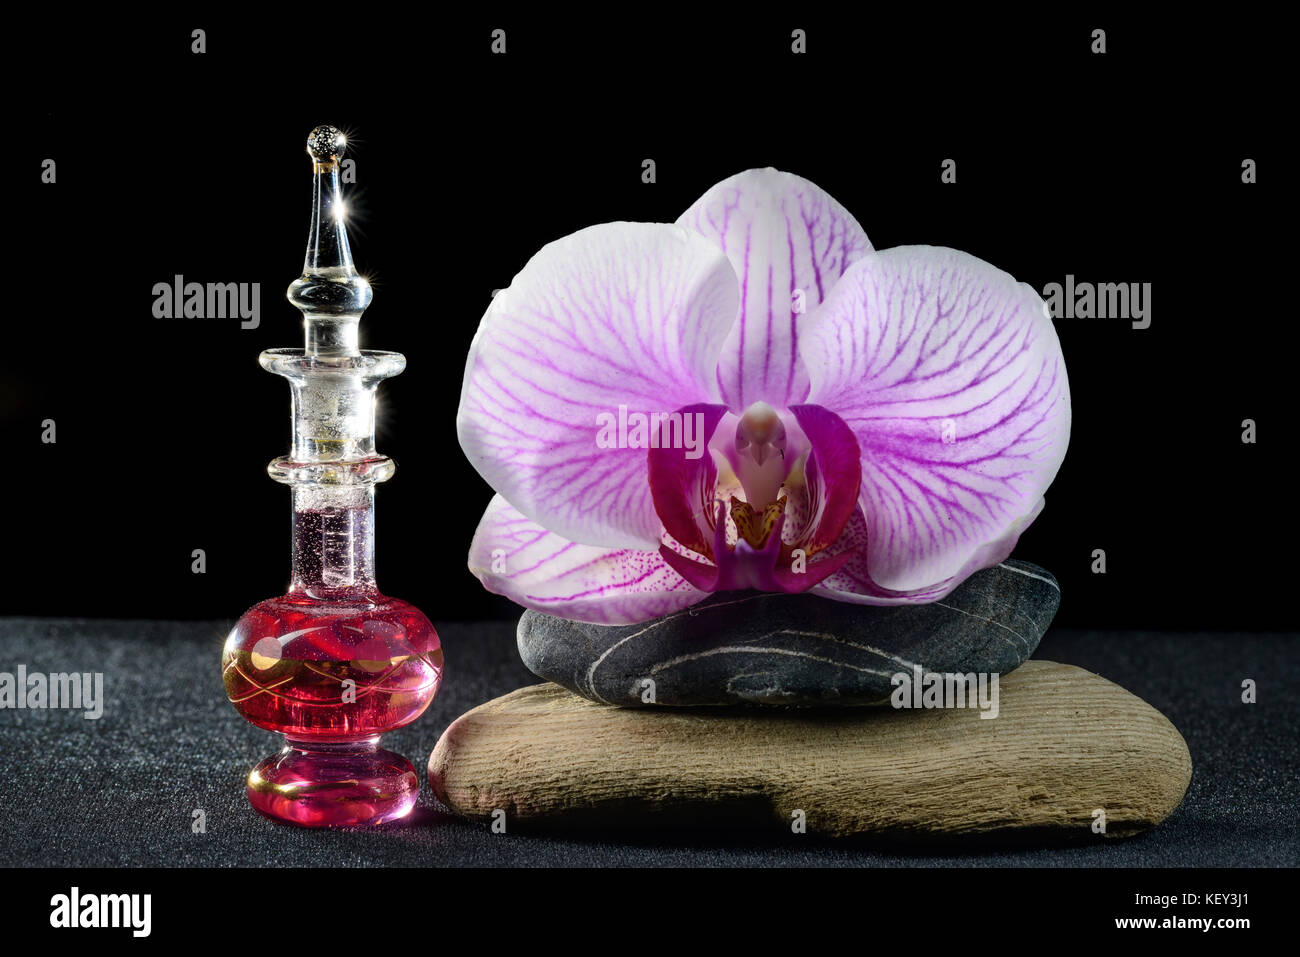 Orchid and perfume bottle Stock Photo